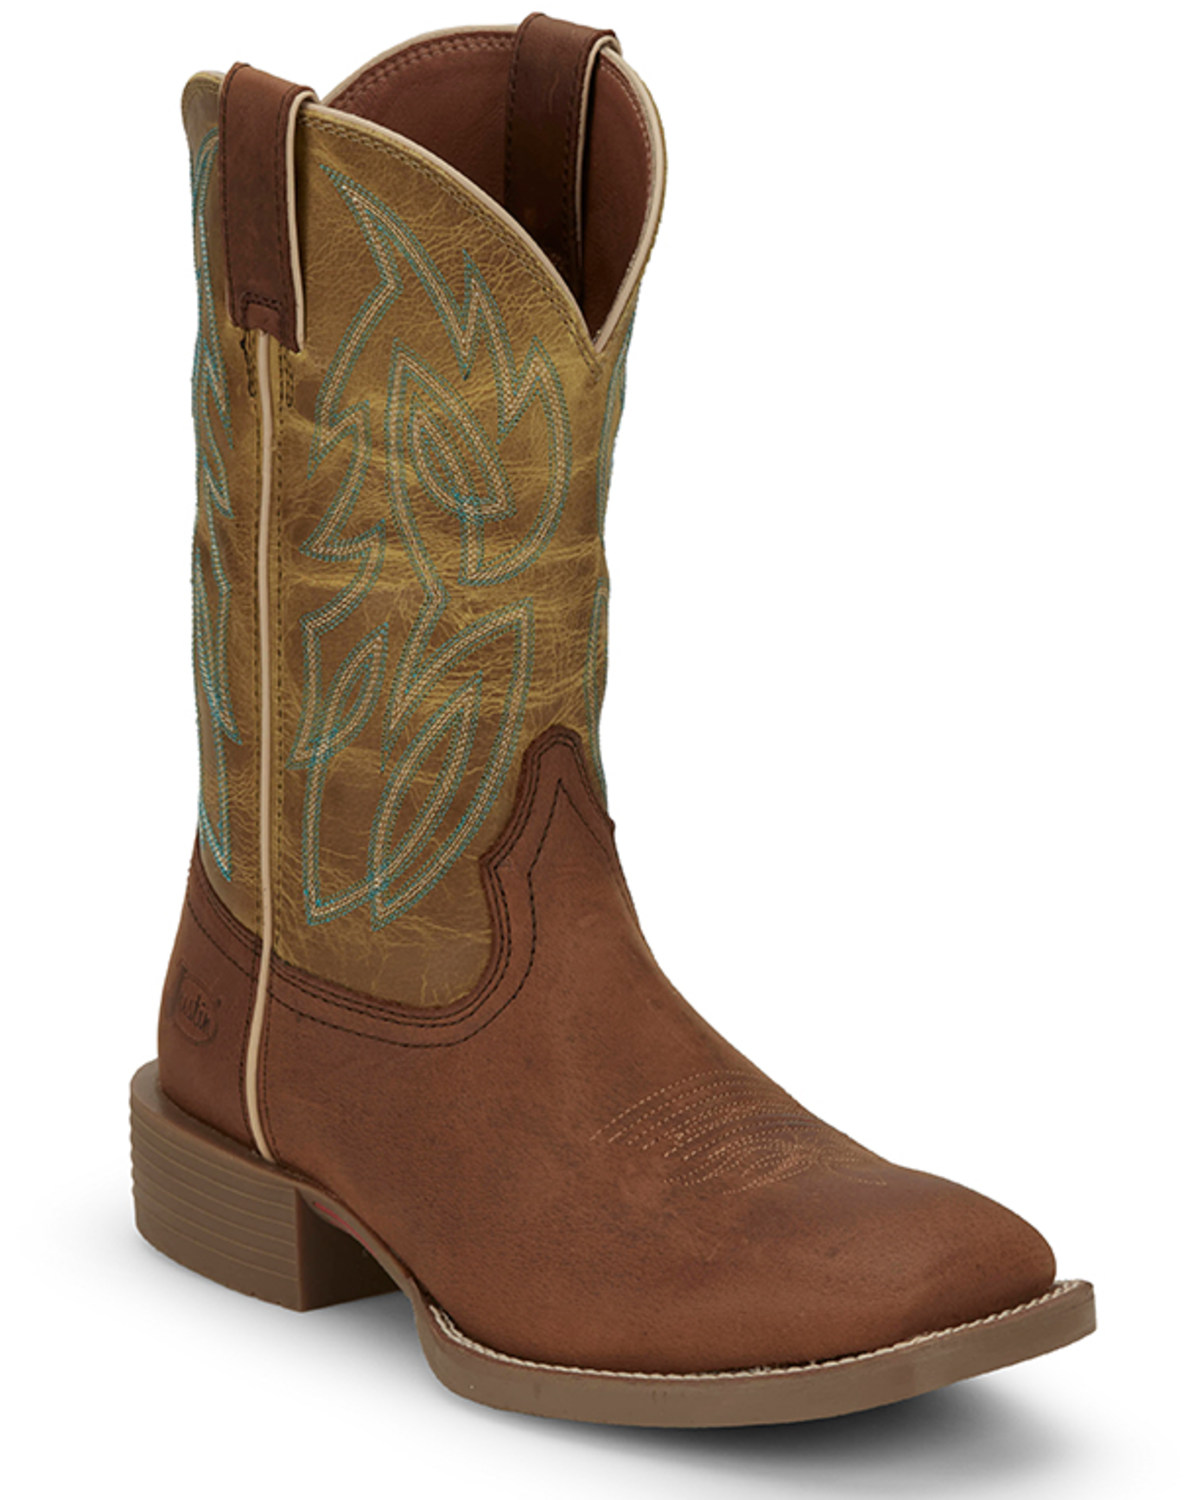 Justin Men's 11" Canter Western Boots